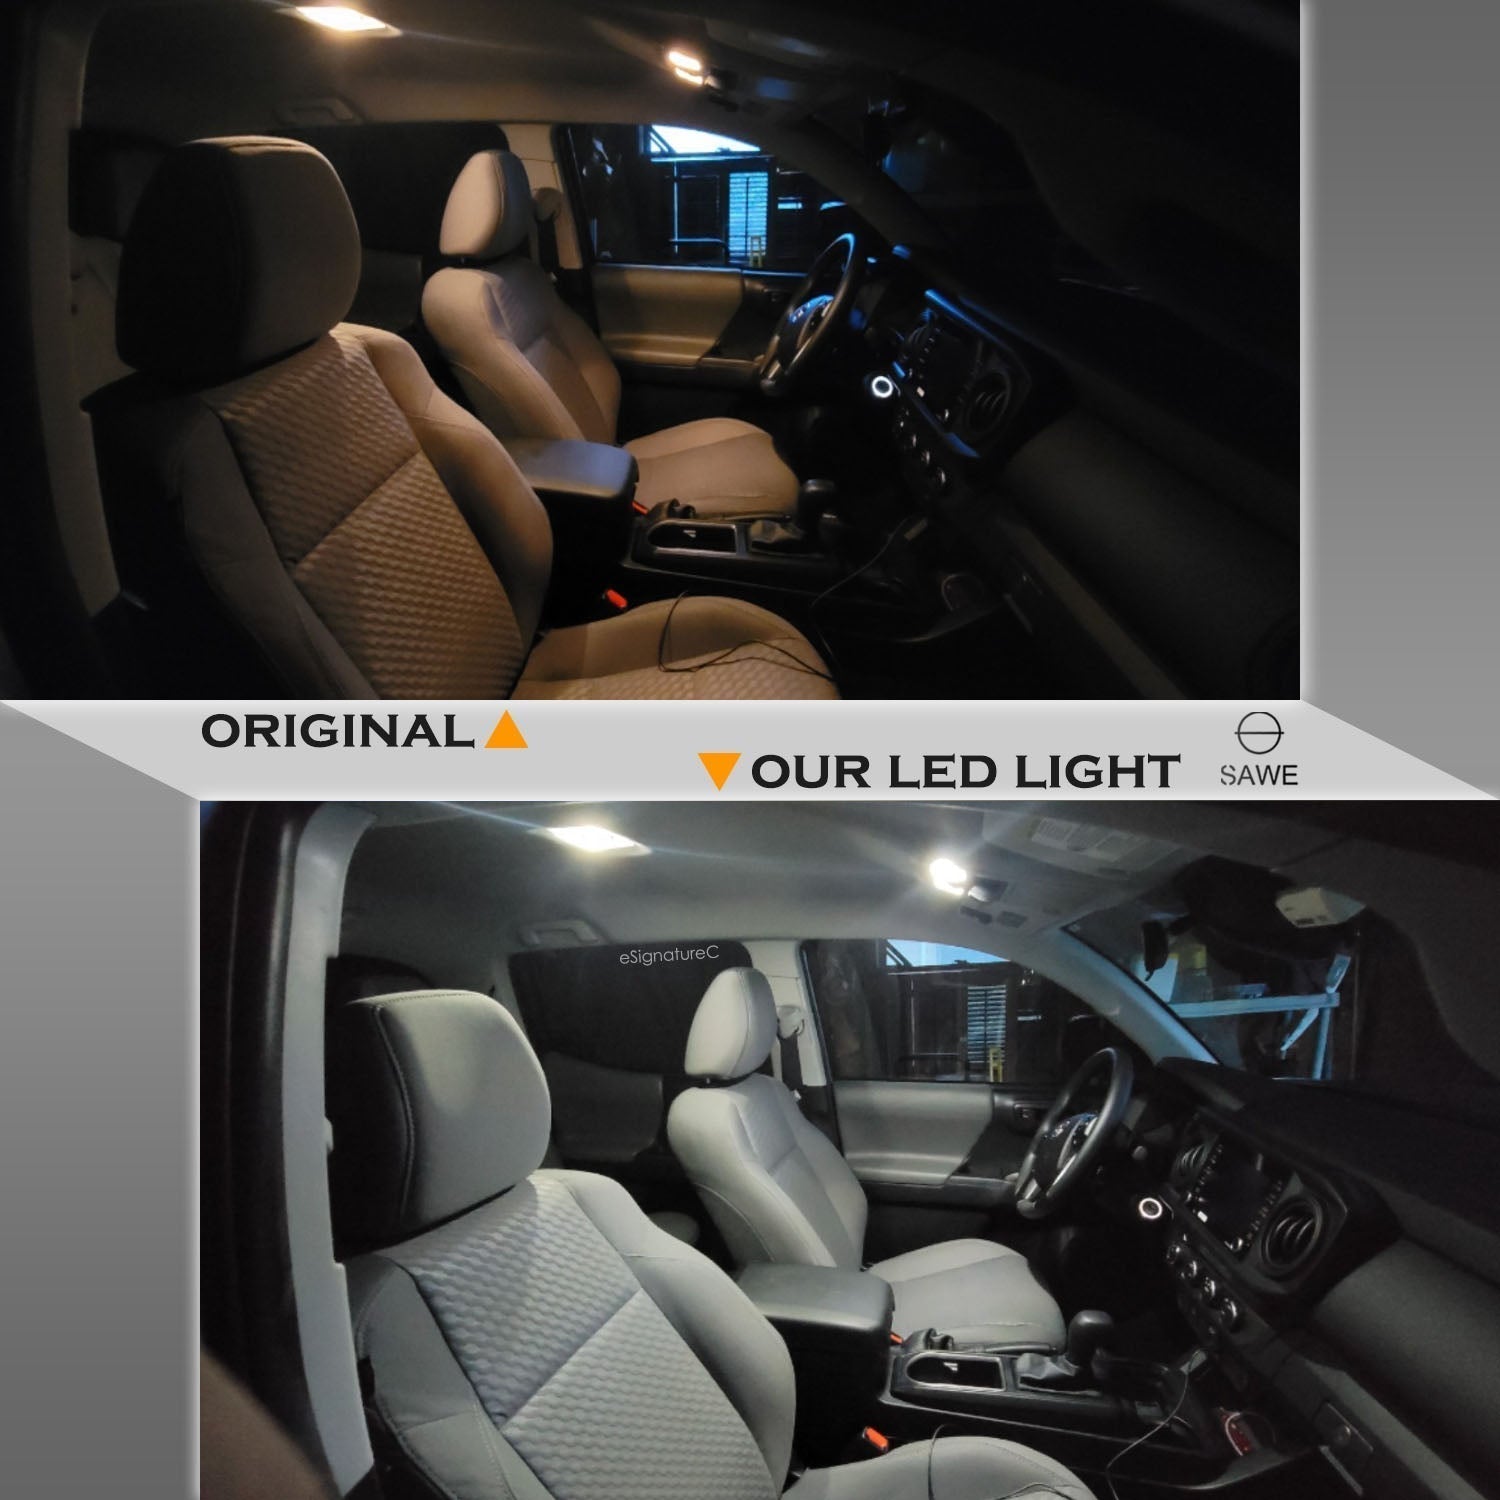 For Nissan Quest Interior LED Lights - Dome & Map Light Bulbs Package Kit for 2011 - 2017 - White